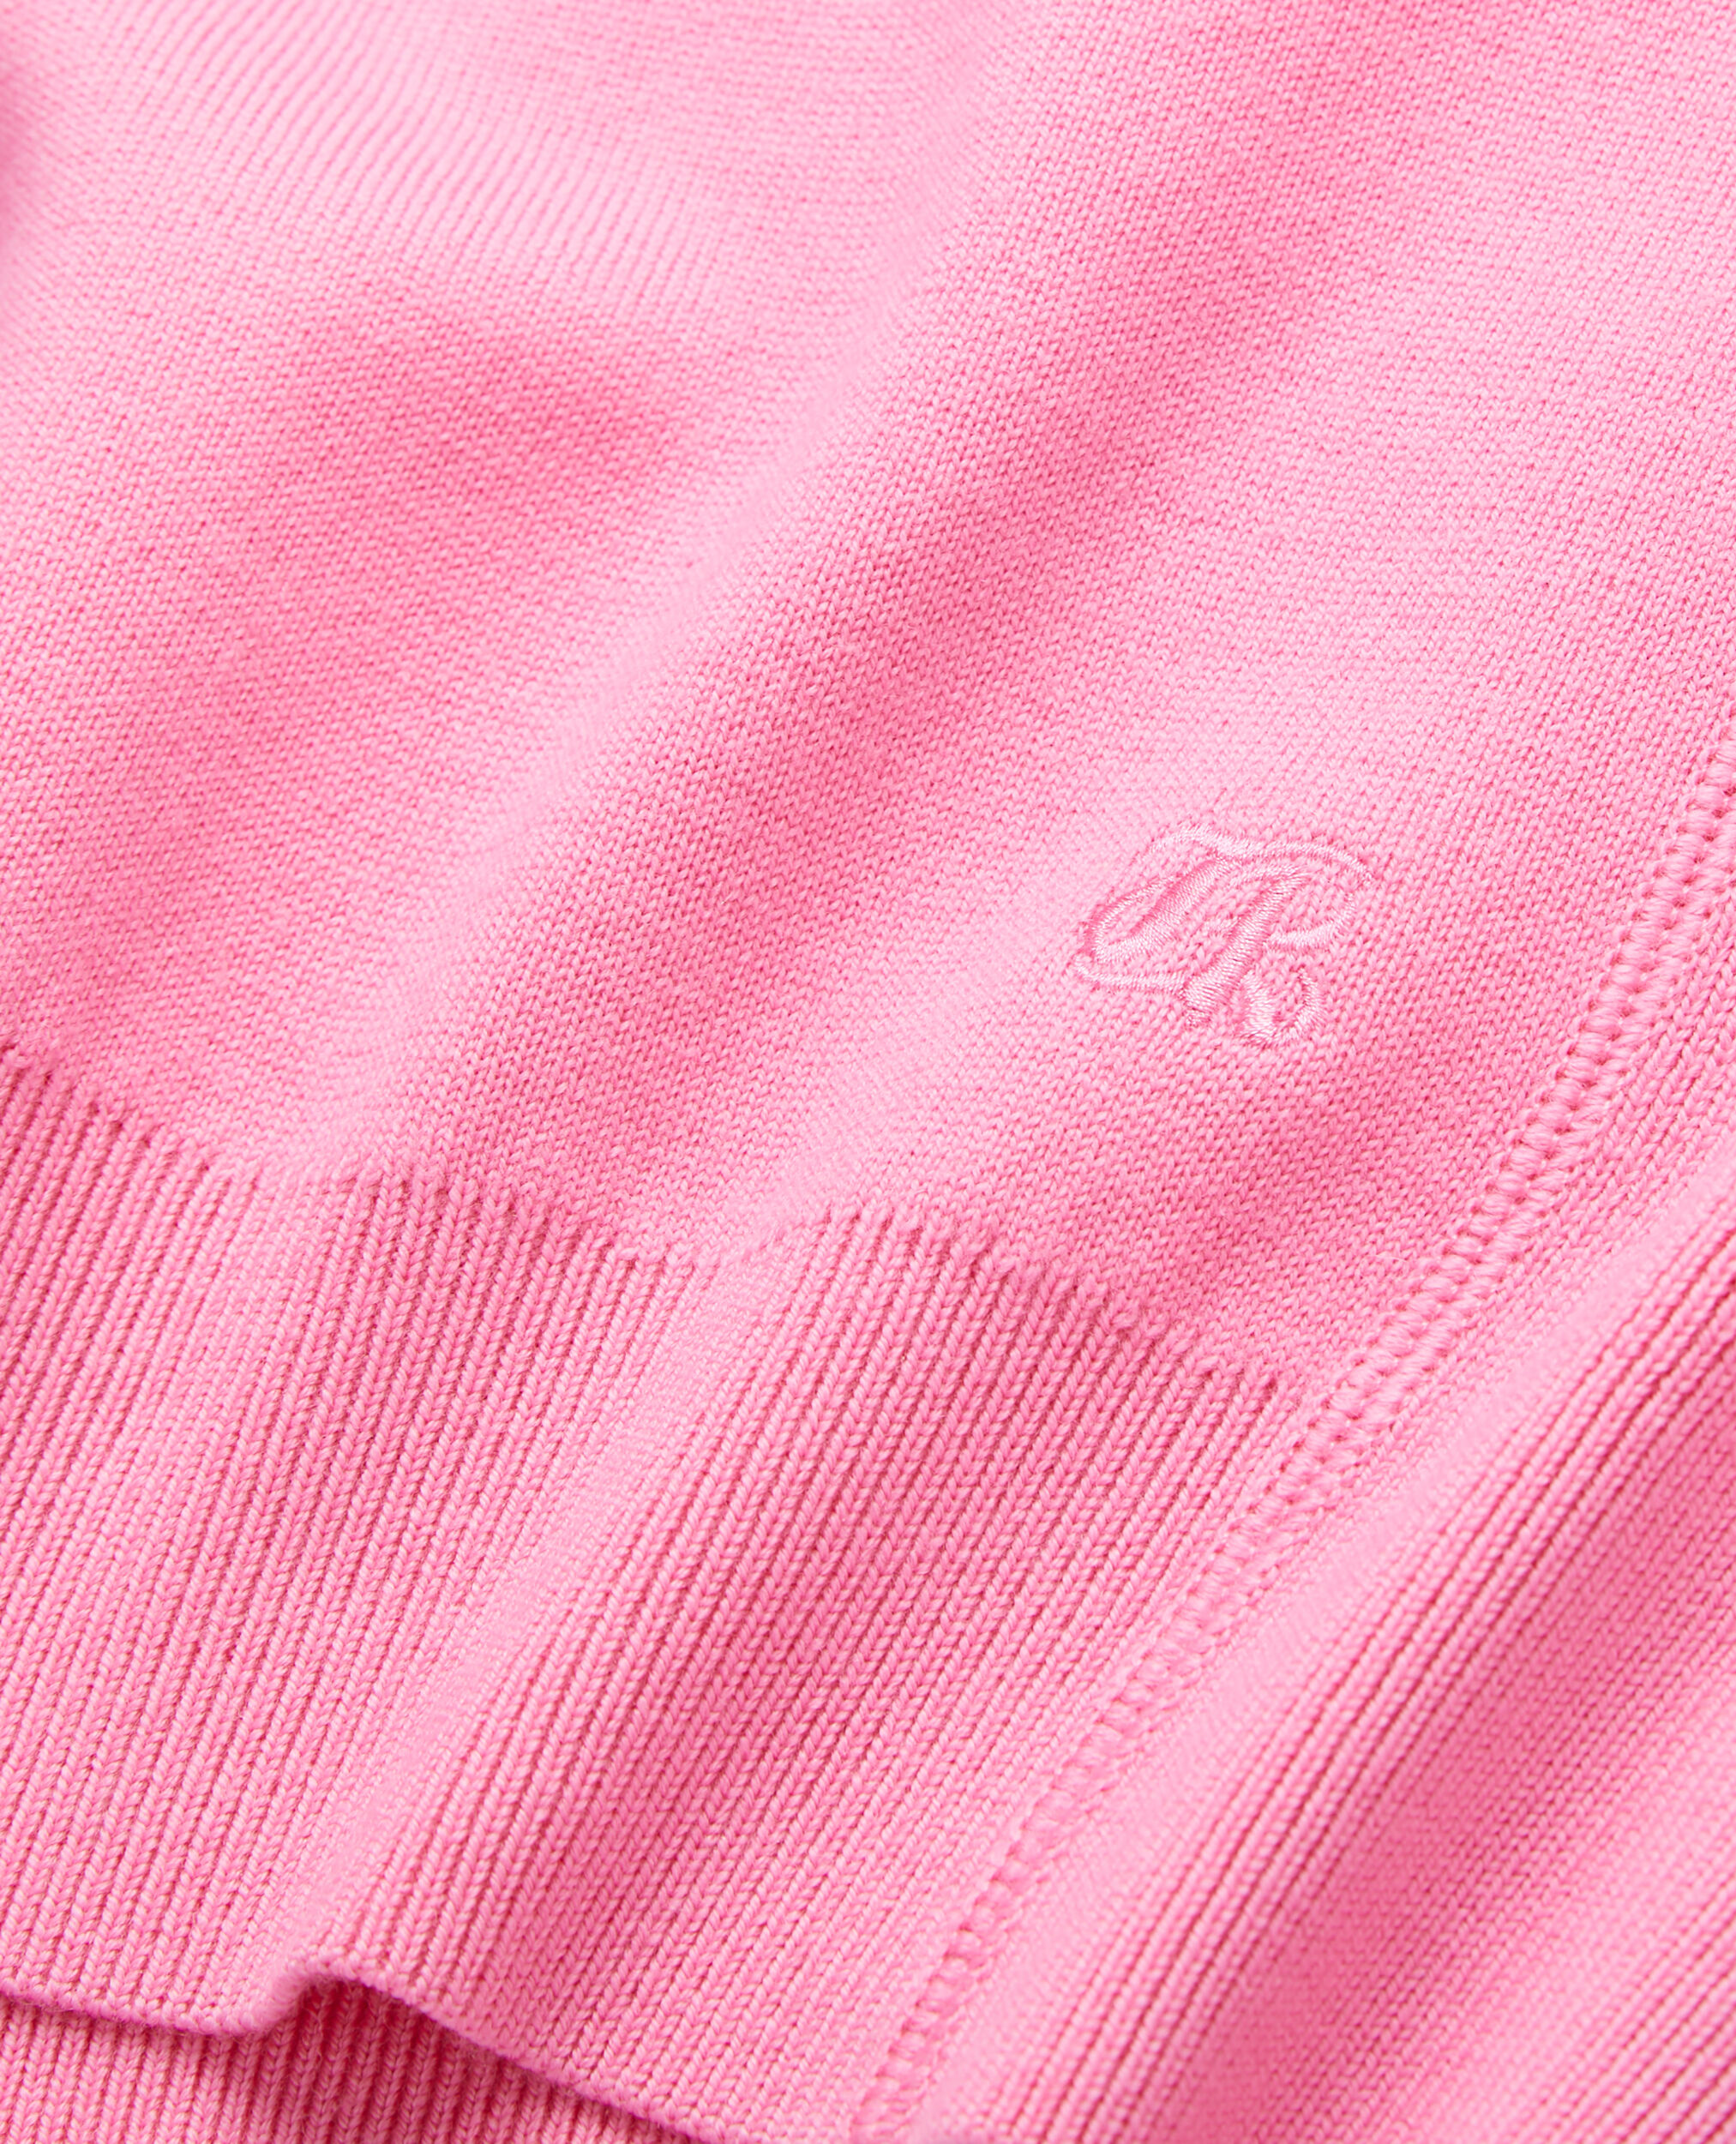 Pull cagoule rose, OLD PINK, hi-res image number null